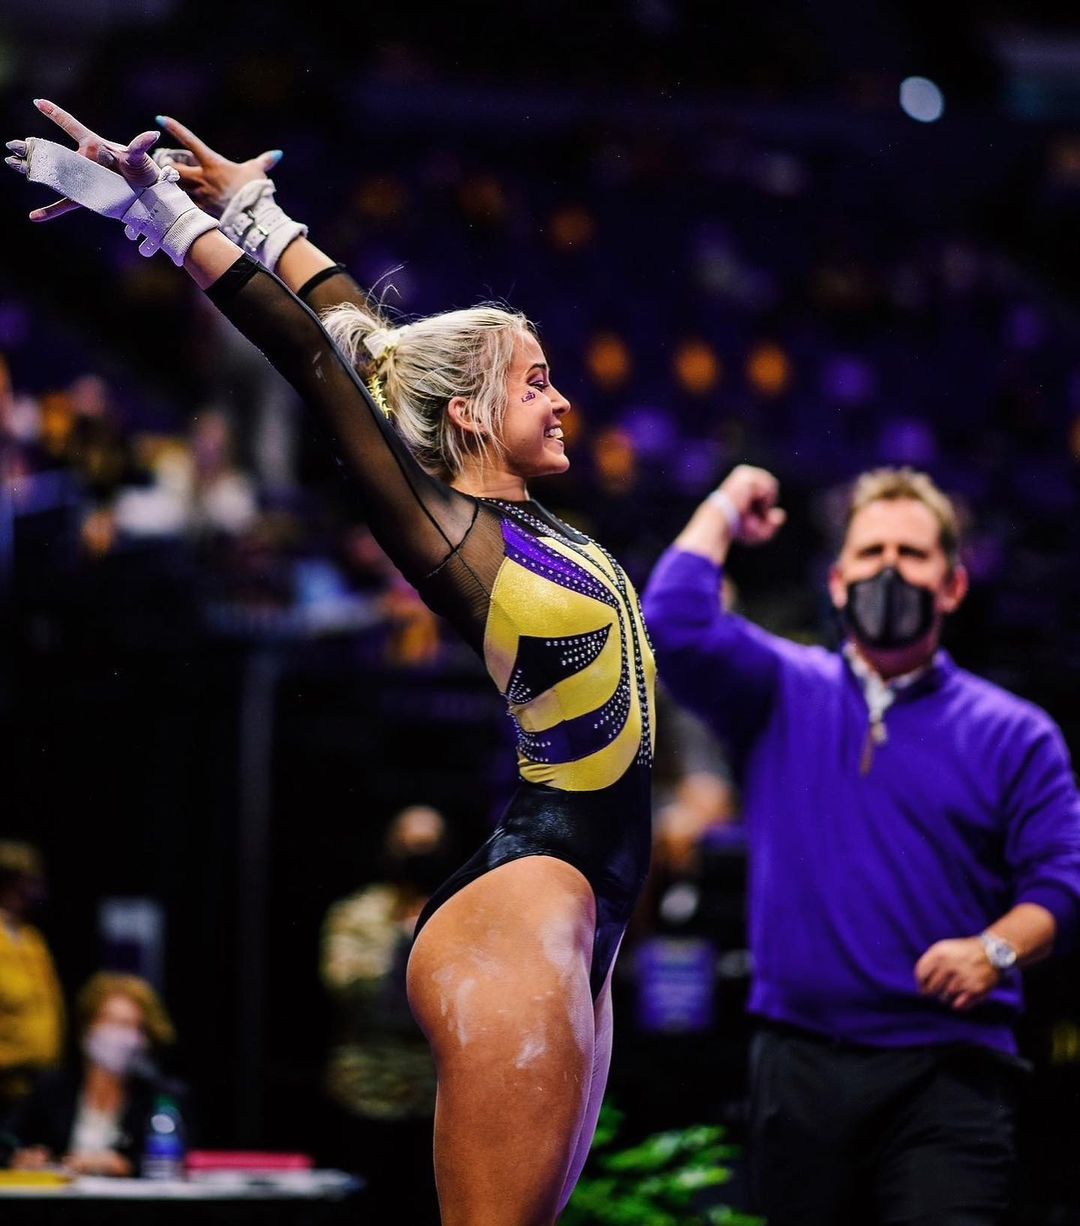 LSU Gymnast Olivia Dunne Had Her Phone Stolen at the Revolve Festival! - Photo 1